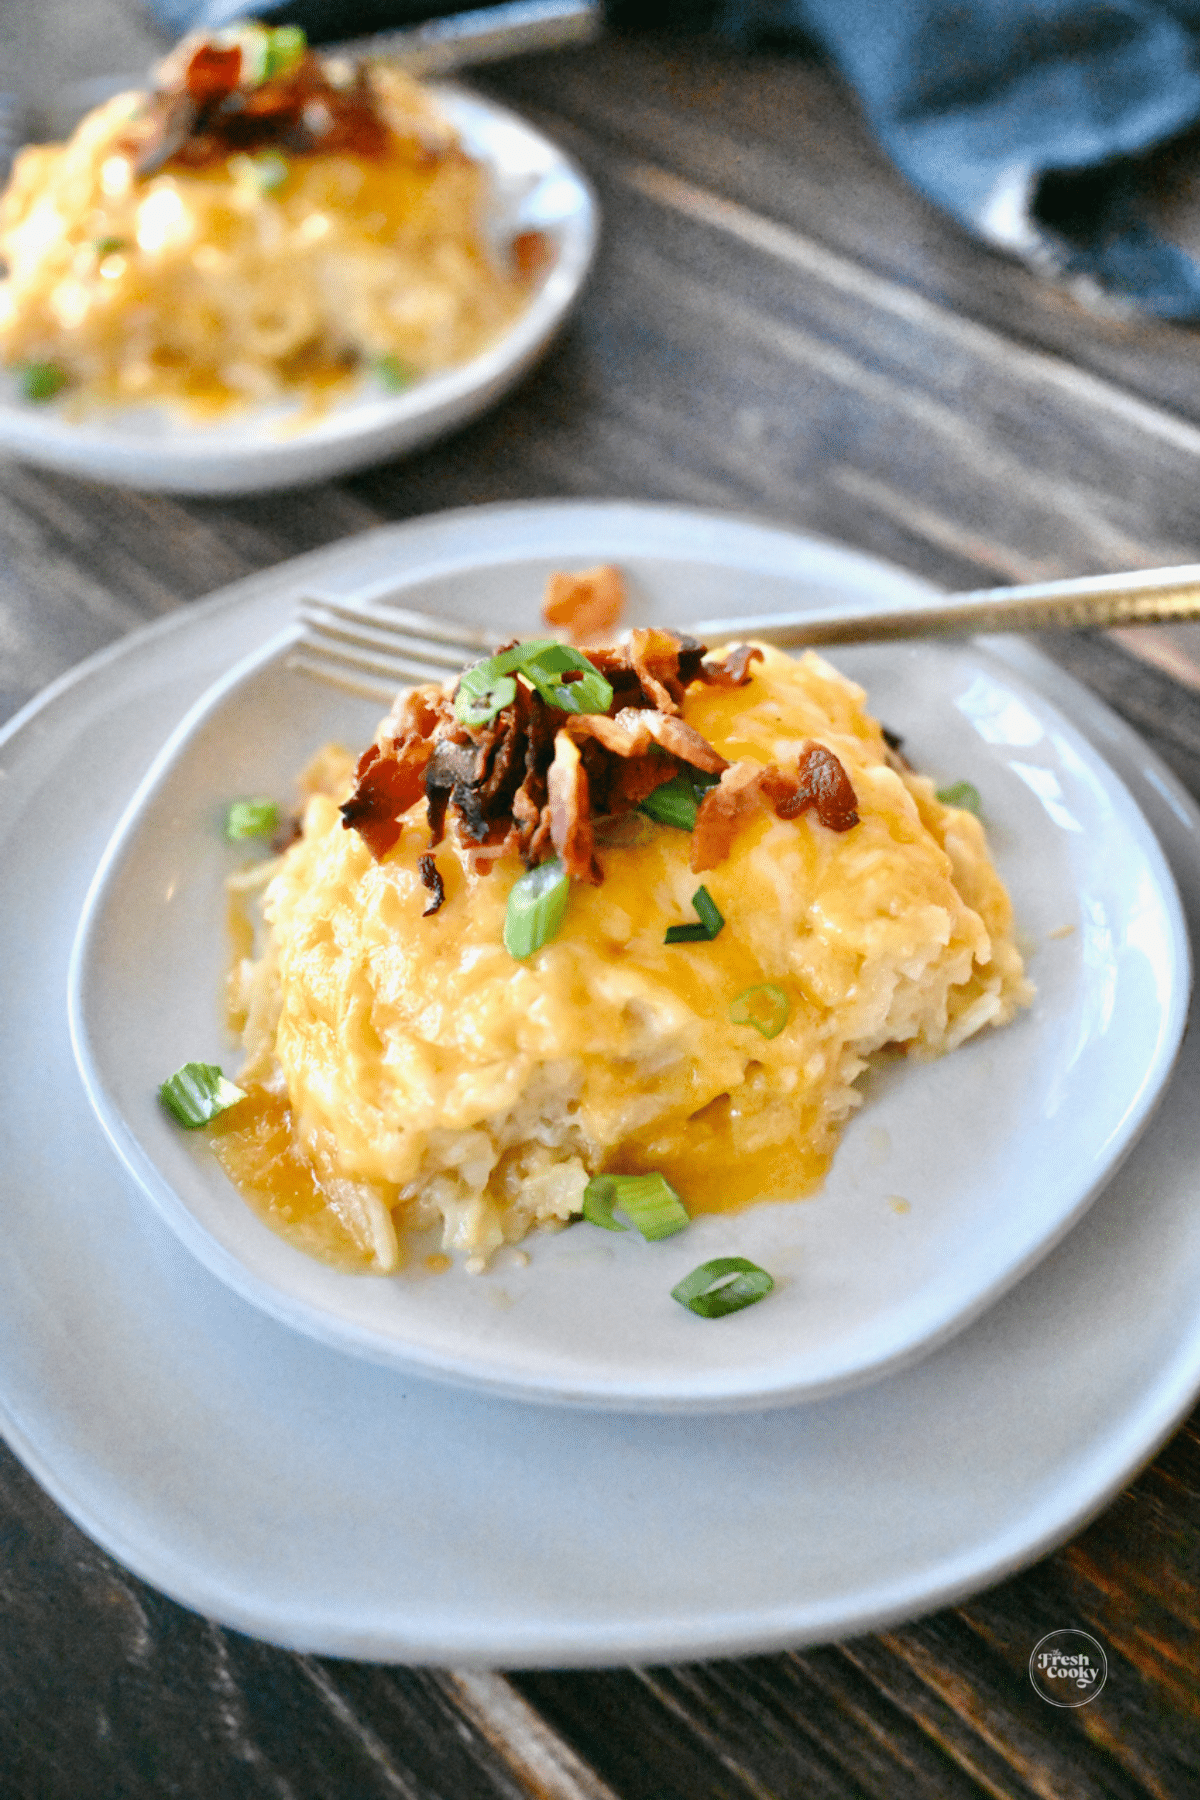 Loaded Cracker Barrel Hashbrown casserole topped with bacon and green onions.